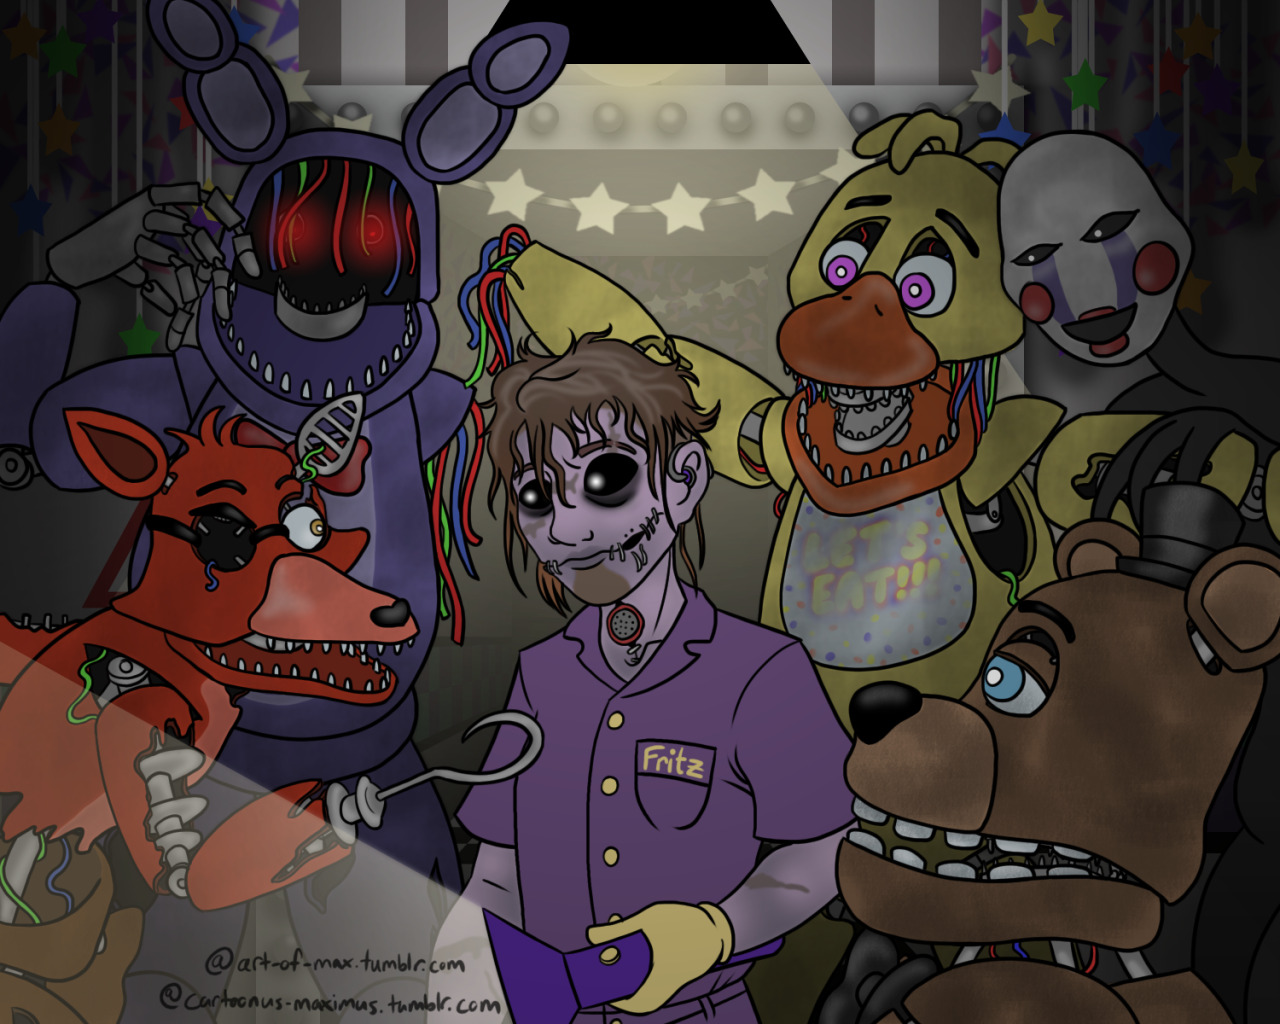 FNAF 2 WITHERED FREDDY Michael mike - Illustrations ART street